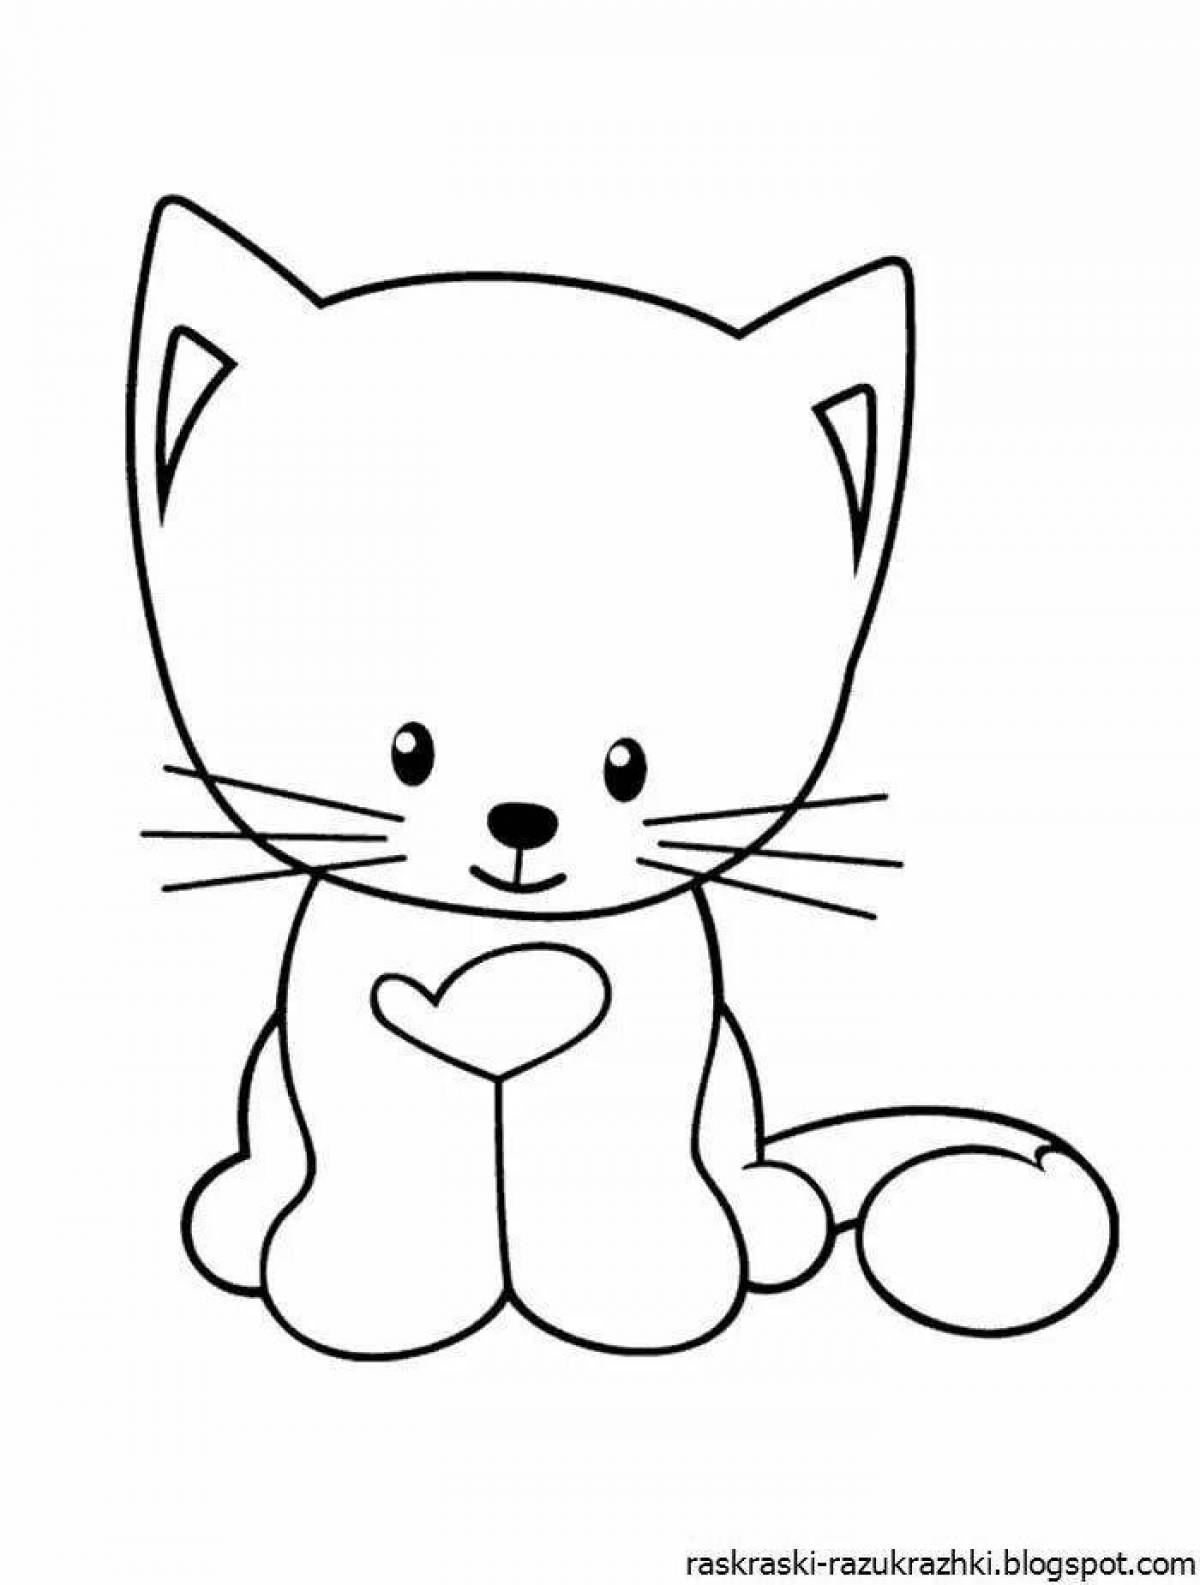 Live kitten coloring for children 2-3 years old